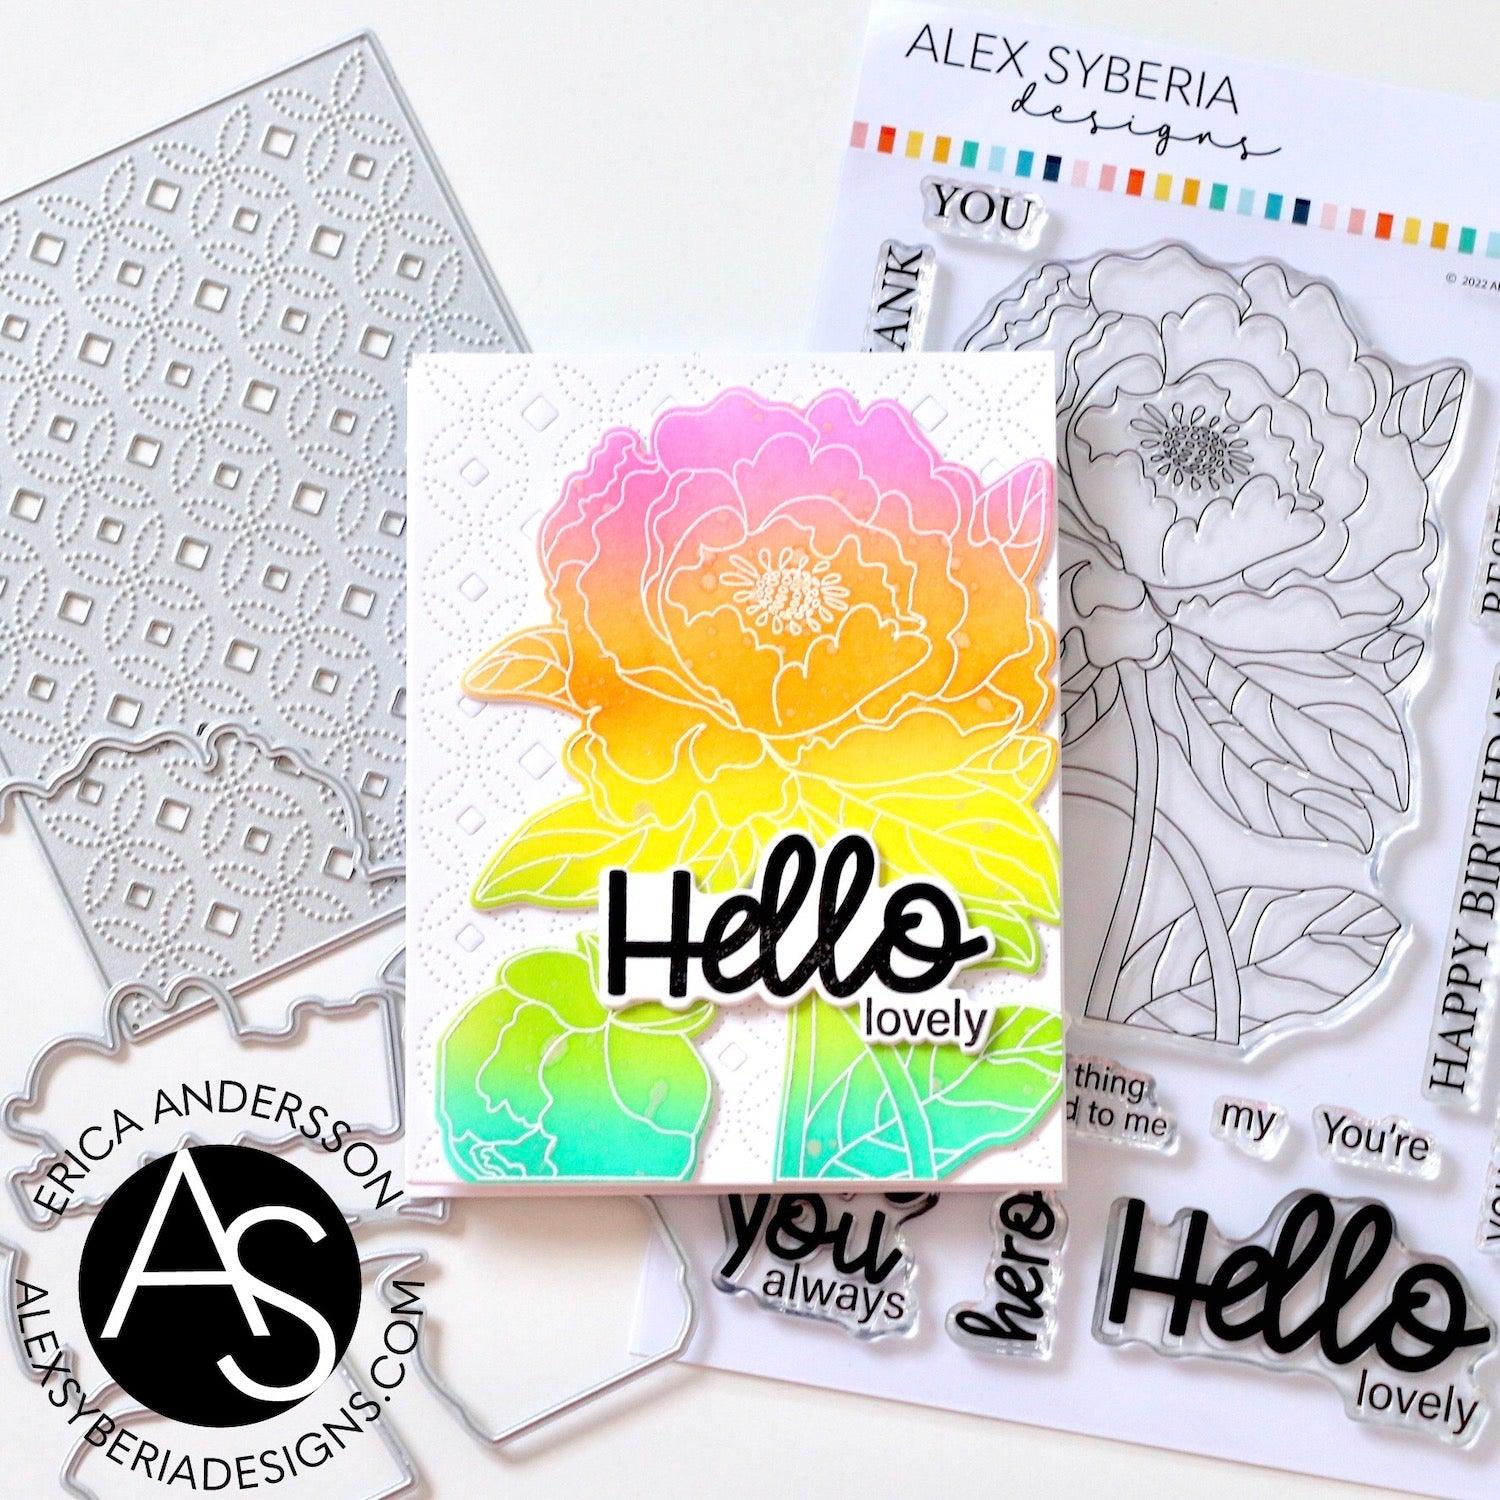 alex-syberia-designs-stamps-hello-lovely-fancy-background-die-cover-cardmaking-tutorials-tips-rainbow-cards-simon-says-stamp